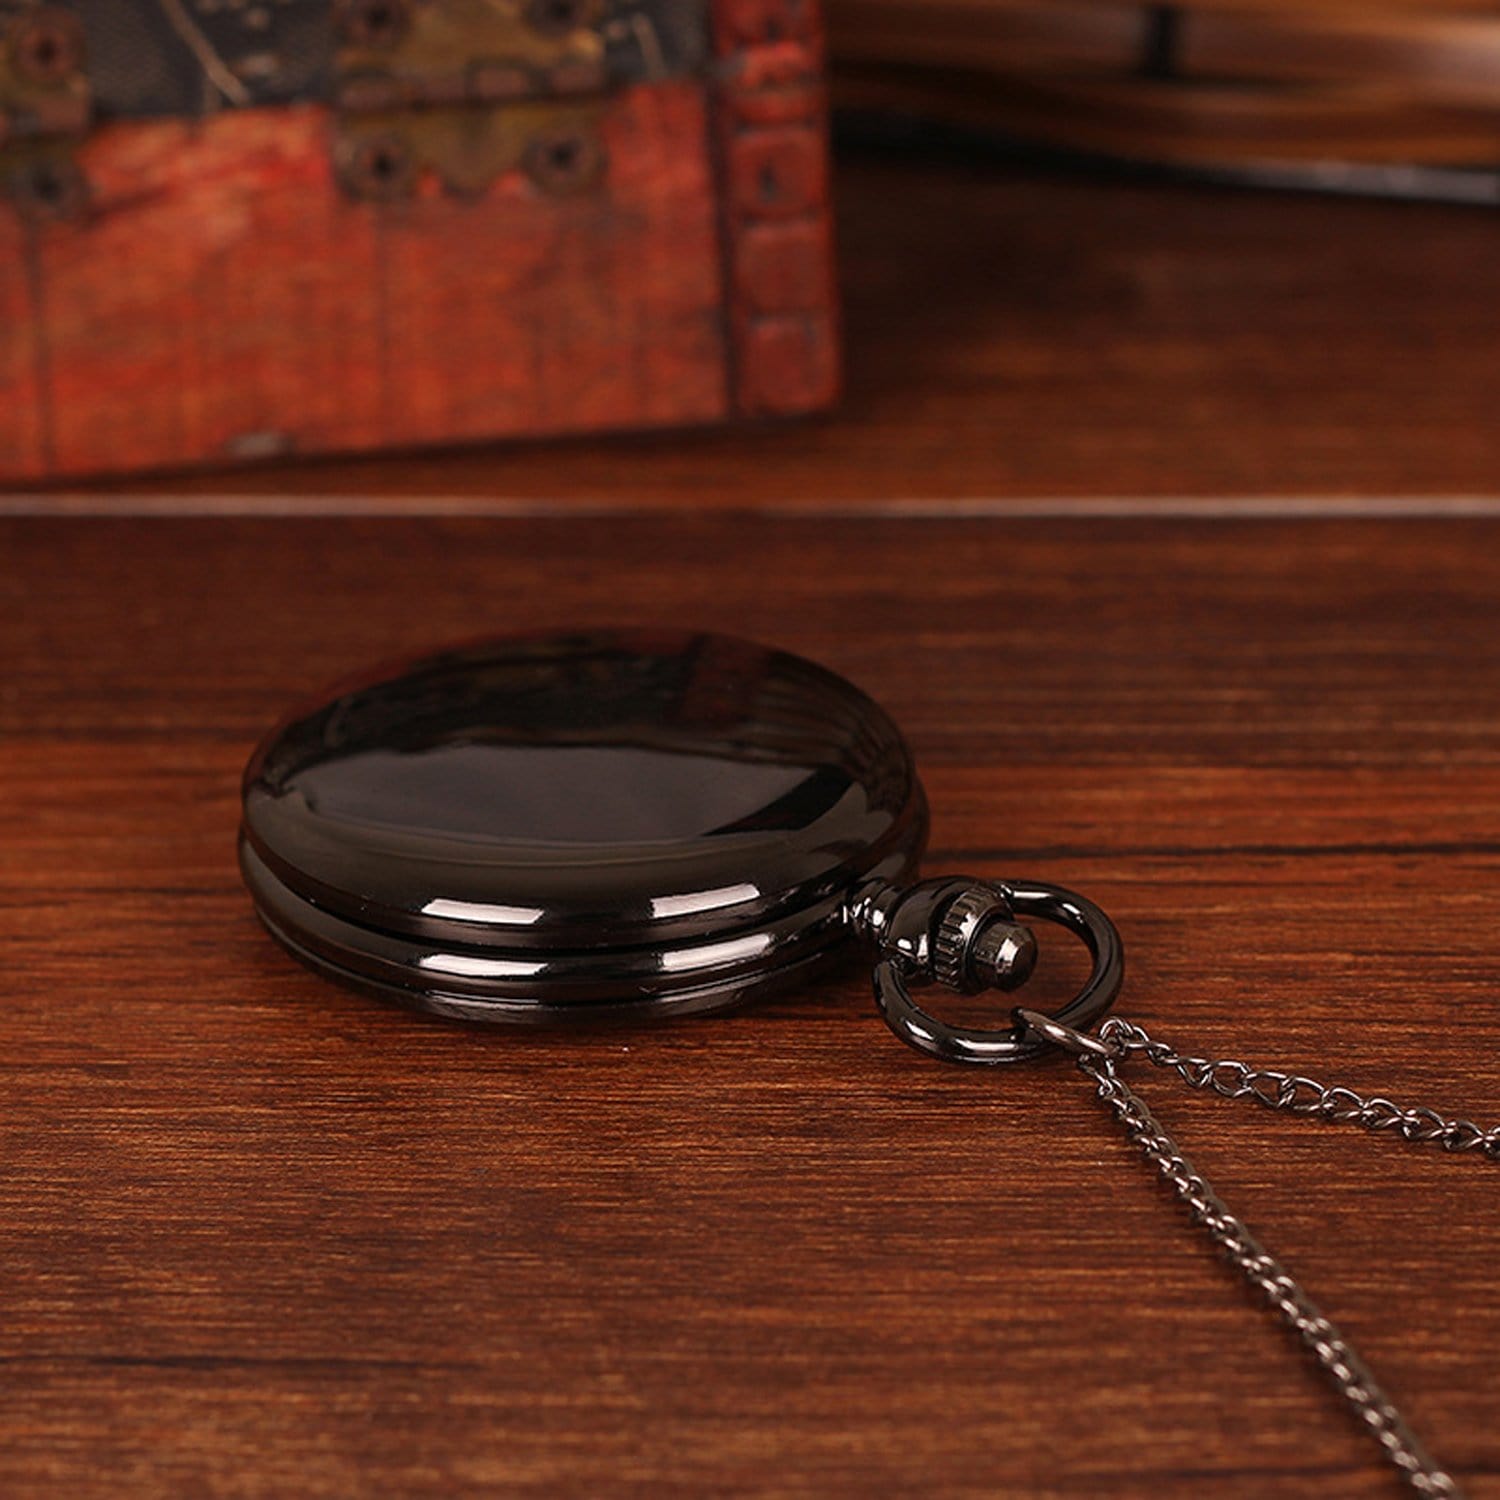 Pocket Watches To My Boyfriend - I Give You My Love Unconditionally Pocket Watch GiveMe-Gifts